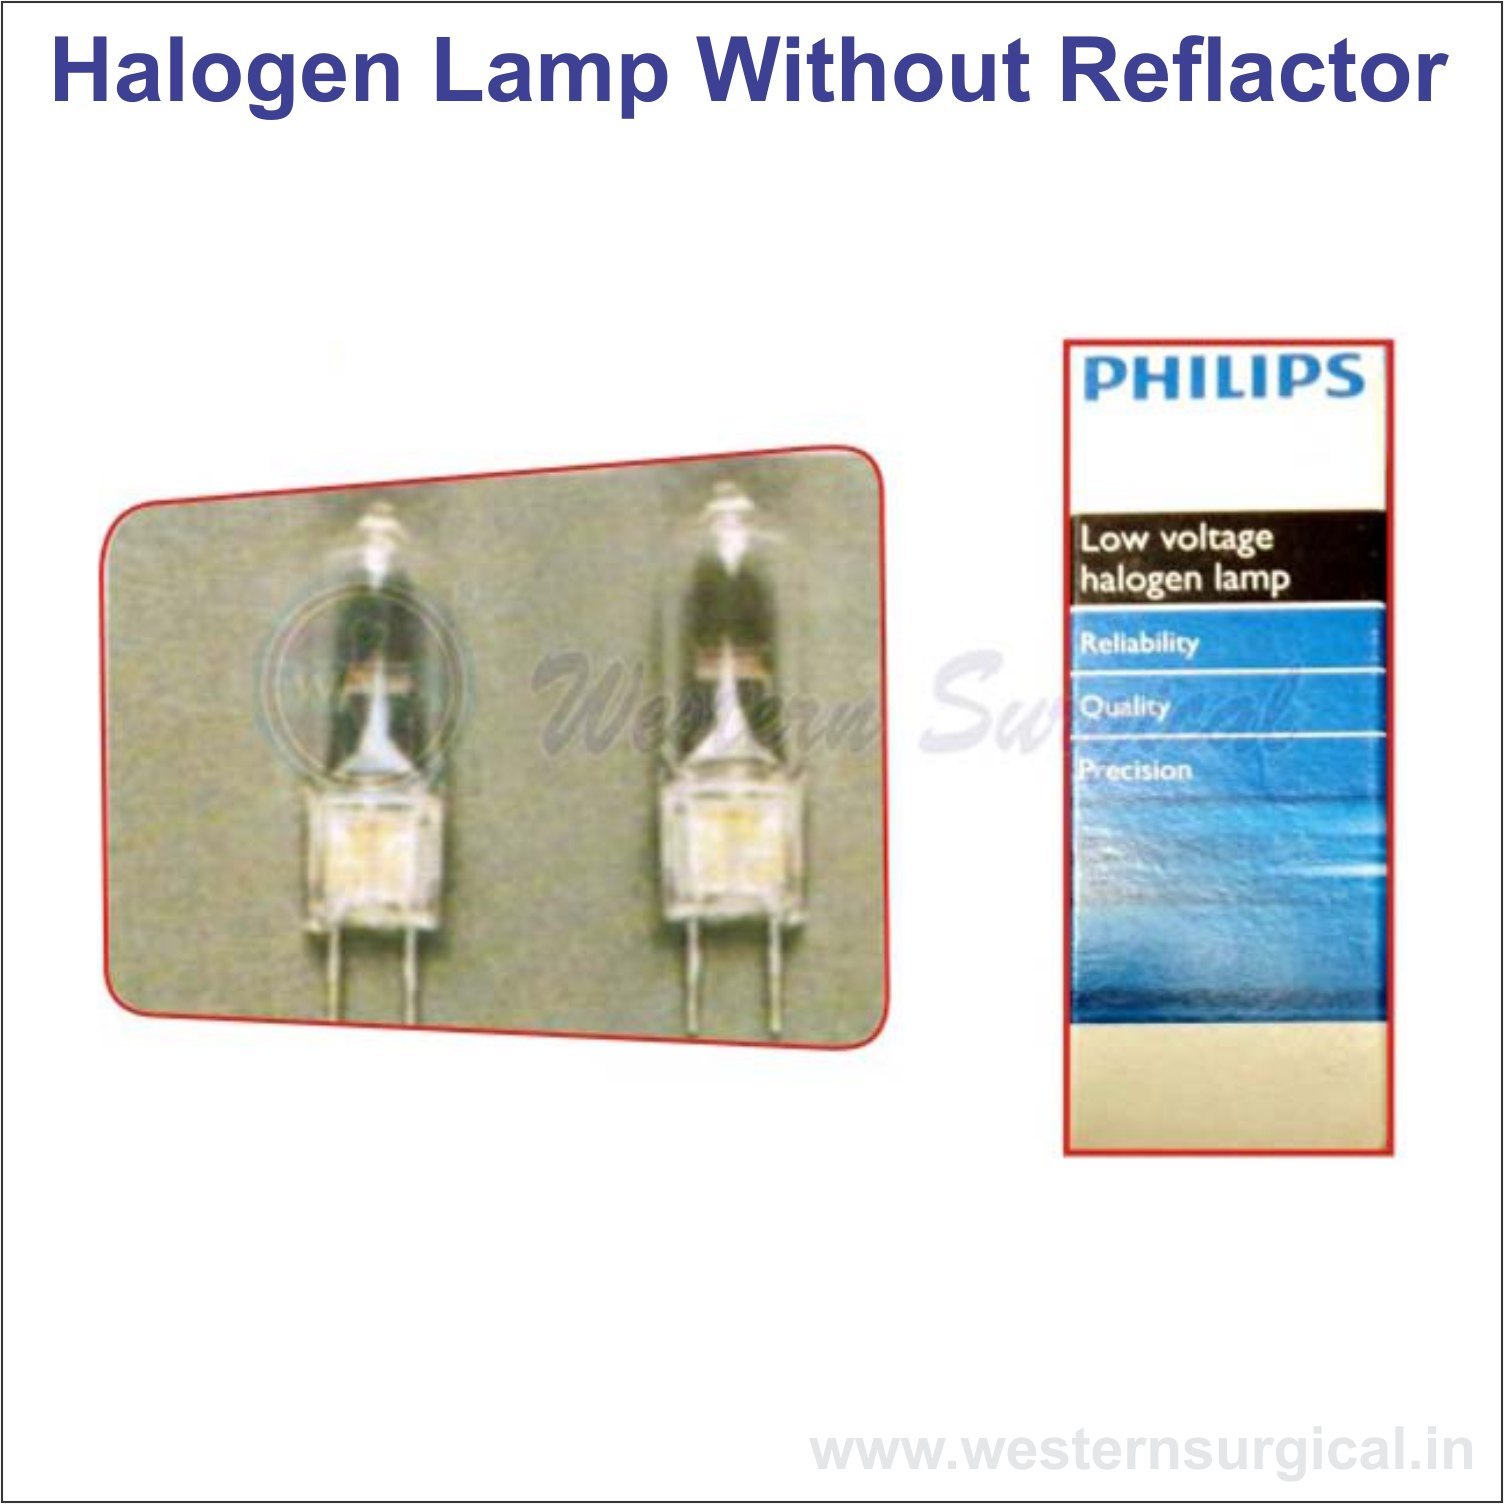 Halogen Lamp Without Reflator